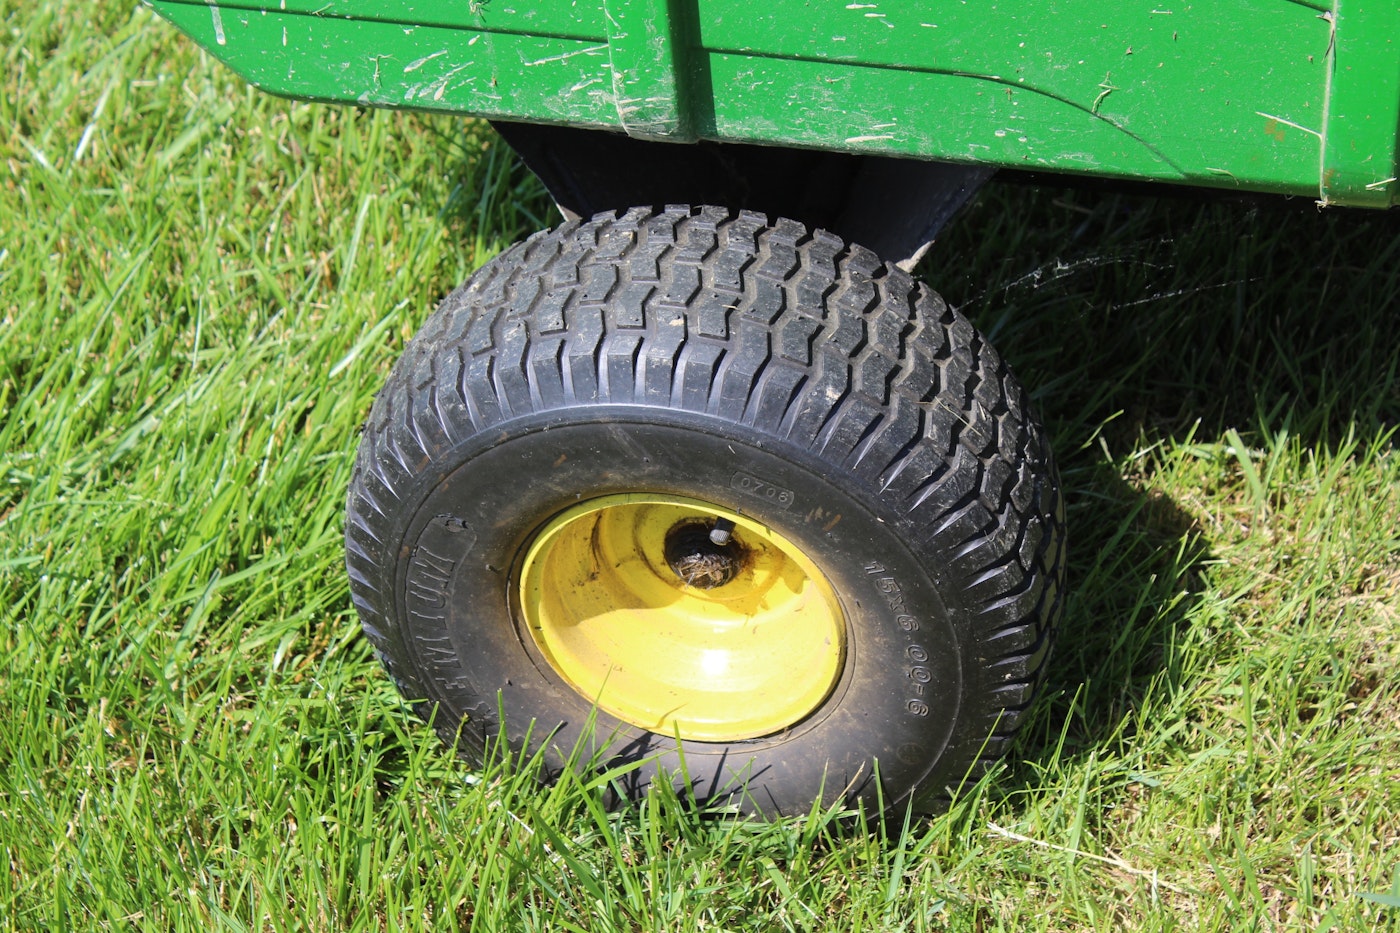 John Deere Utility Cart Tires All In One Photos | Images and Photos finder